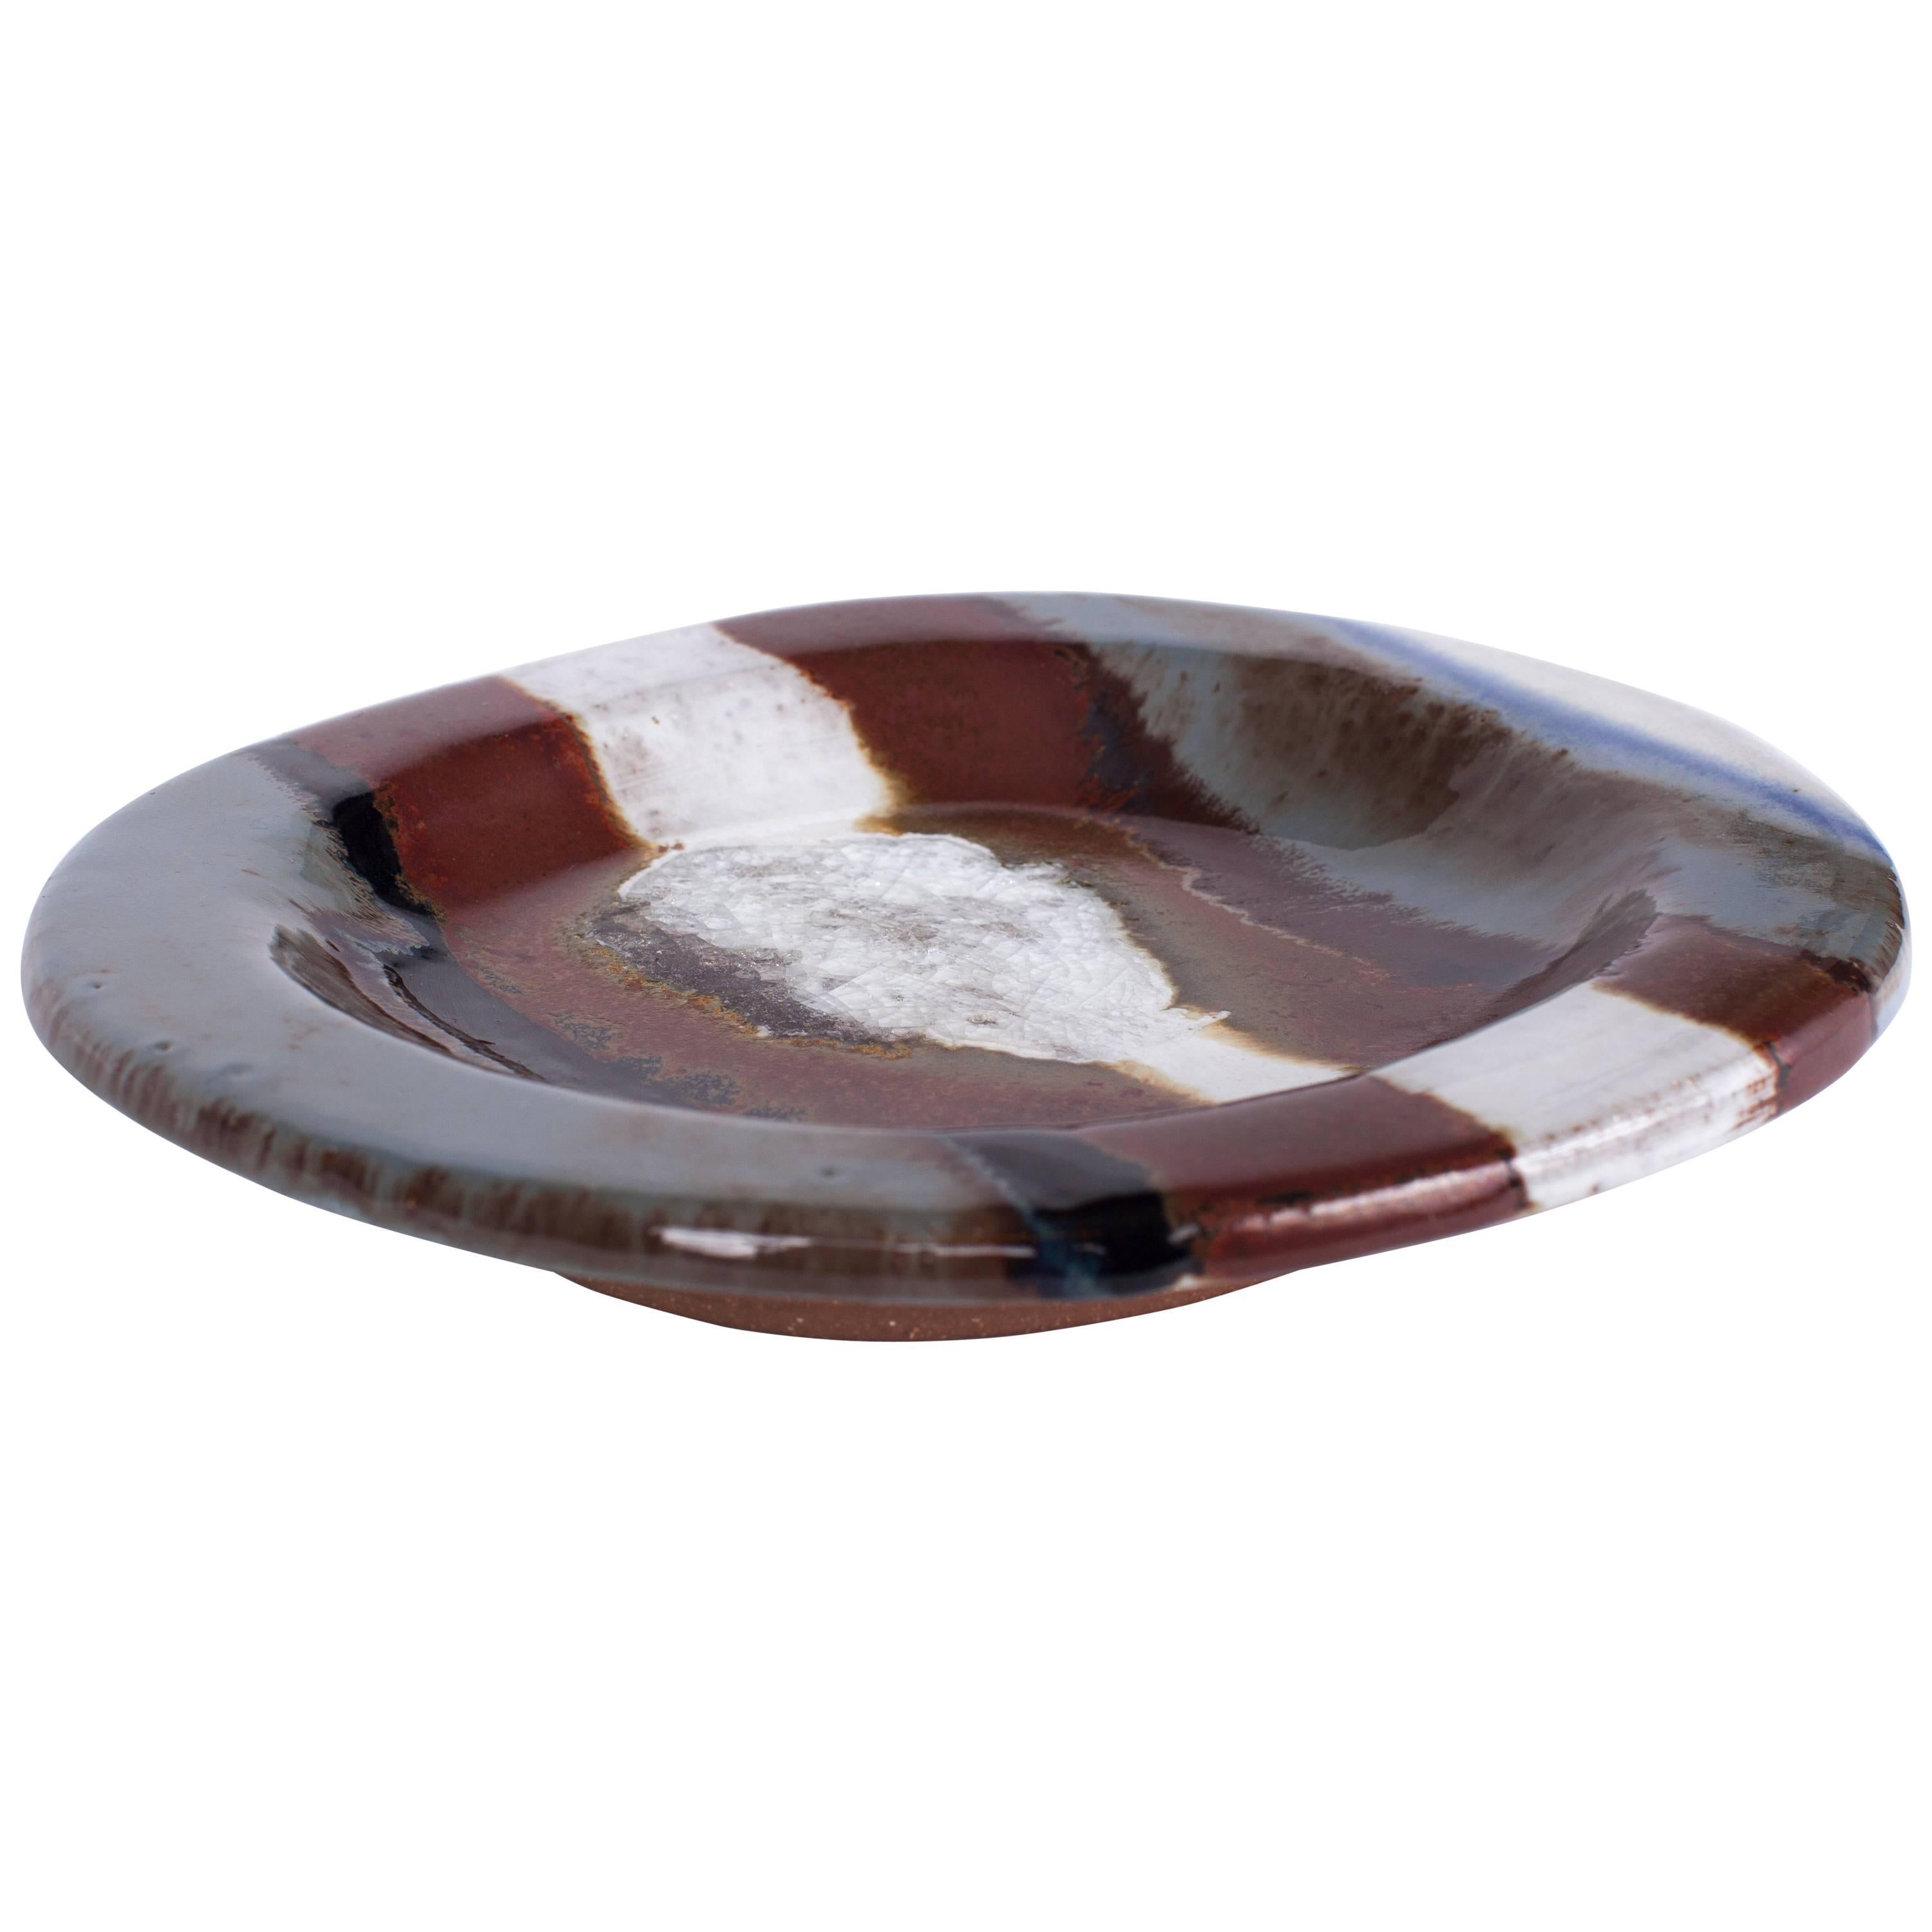 Crackle-Glaze Ceramic Dish by Jacques Pouchain in Black and Brown, France 1980's For Sale